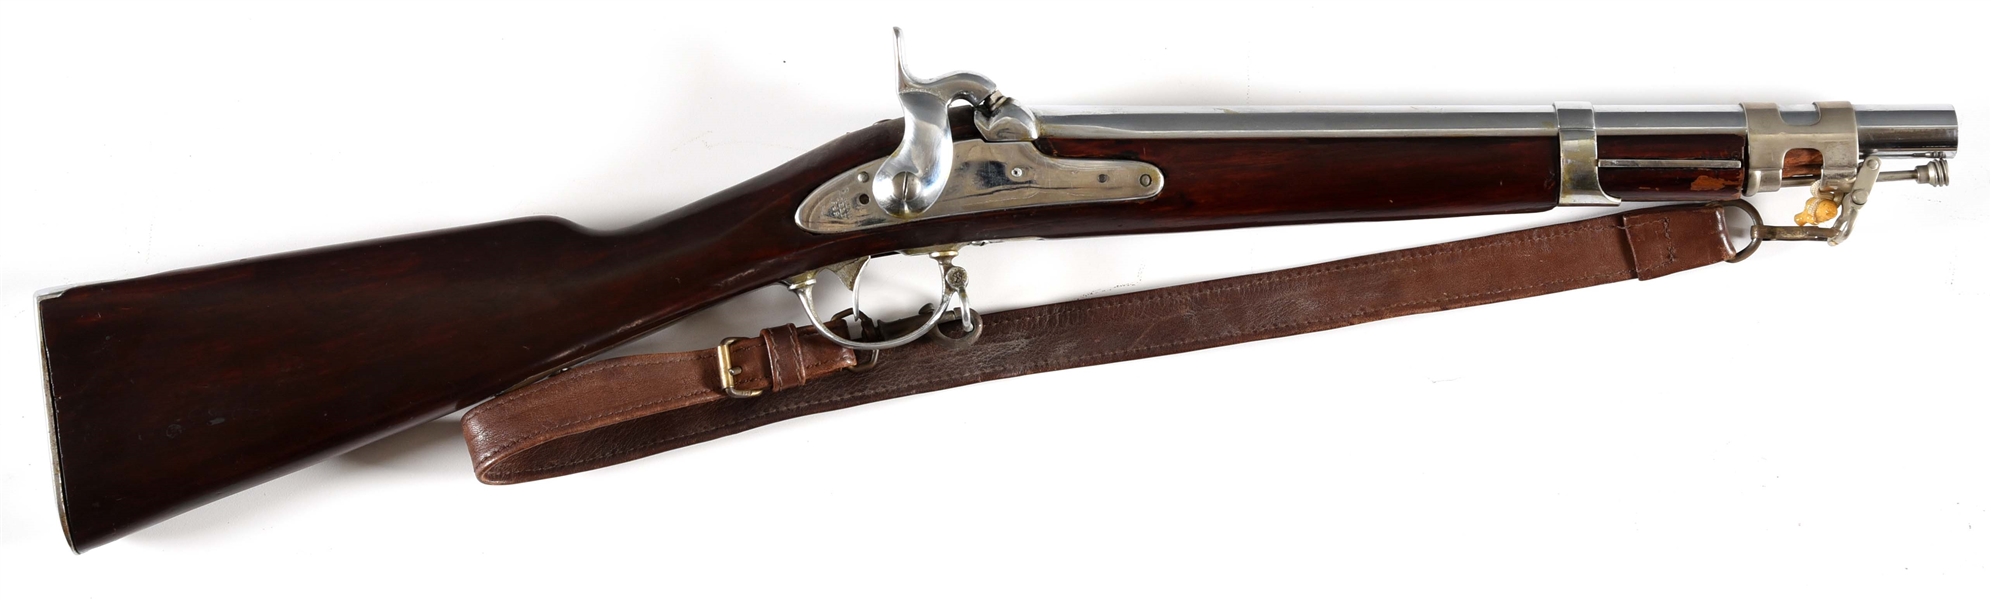 (A) SPRINGFIELD 1842 PERCUSSION MUSKET WITH CUT DOWN BARREL.